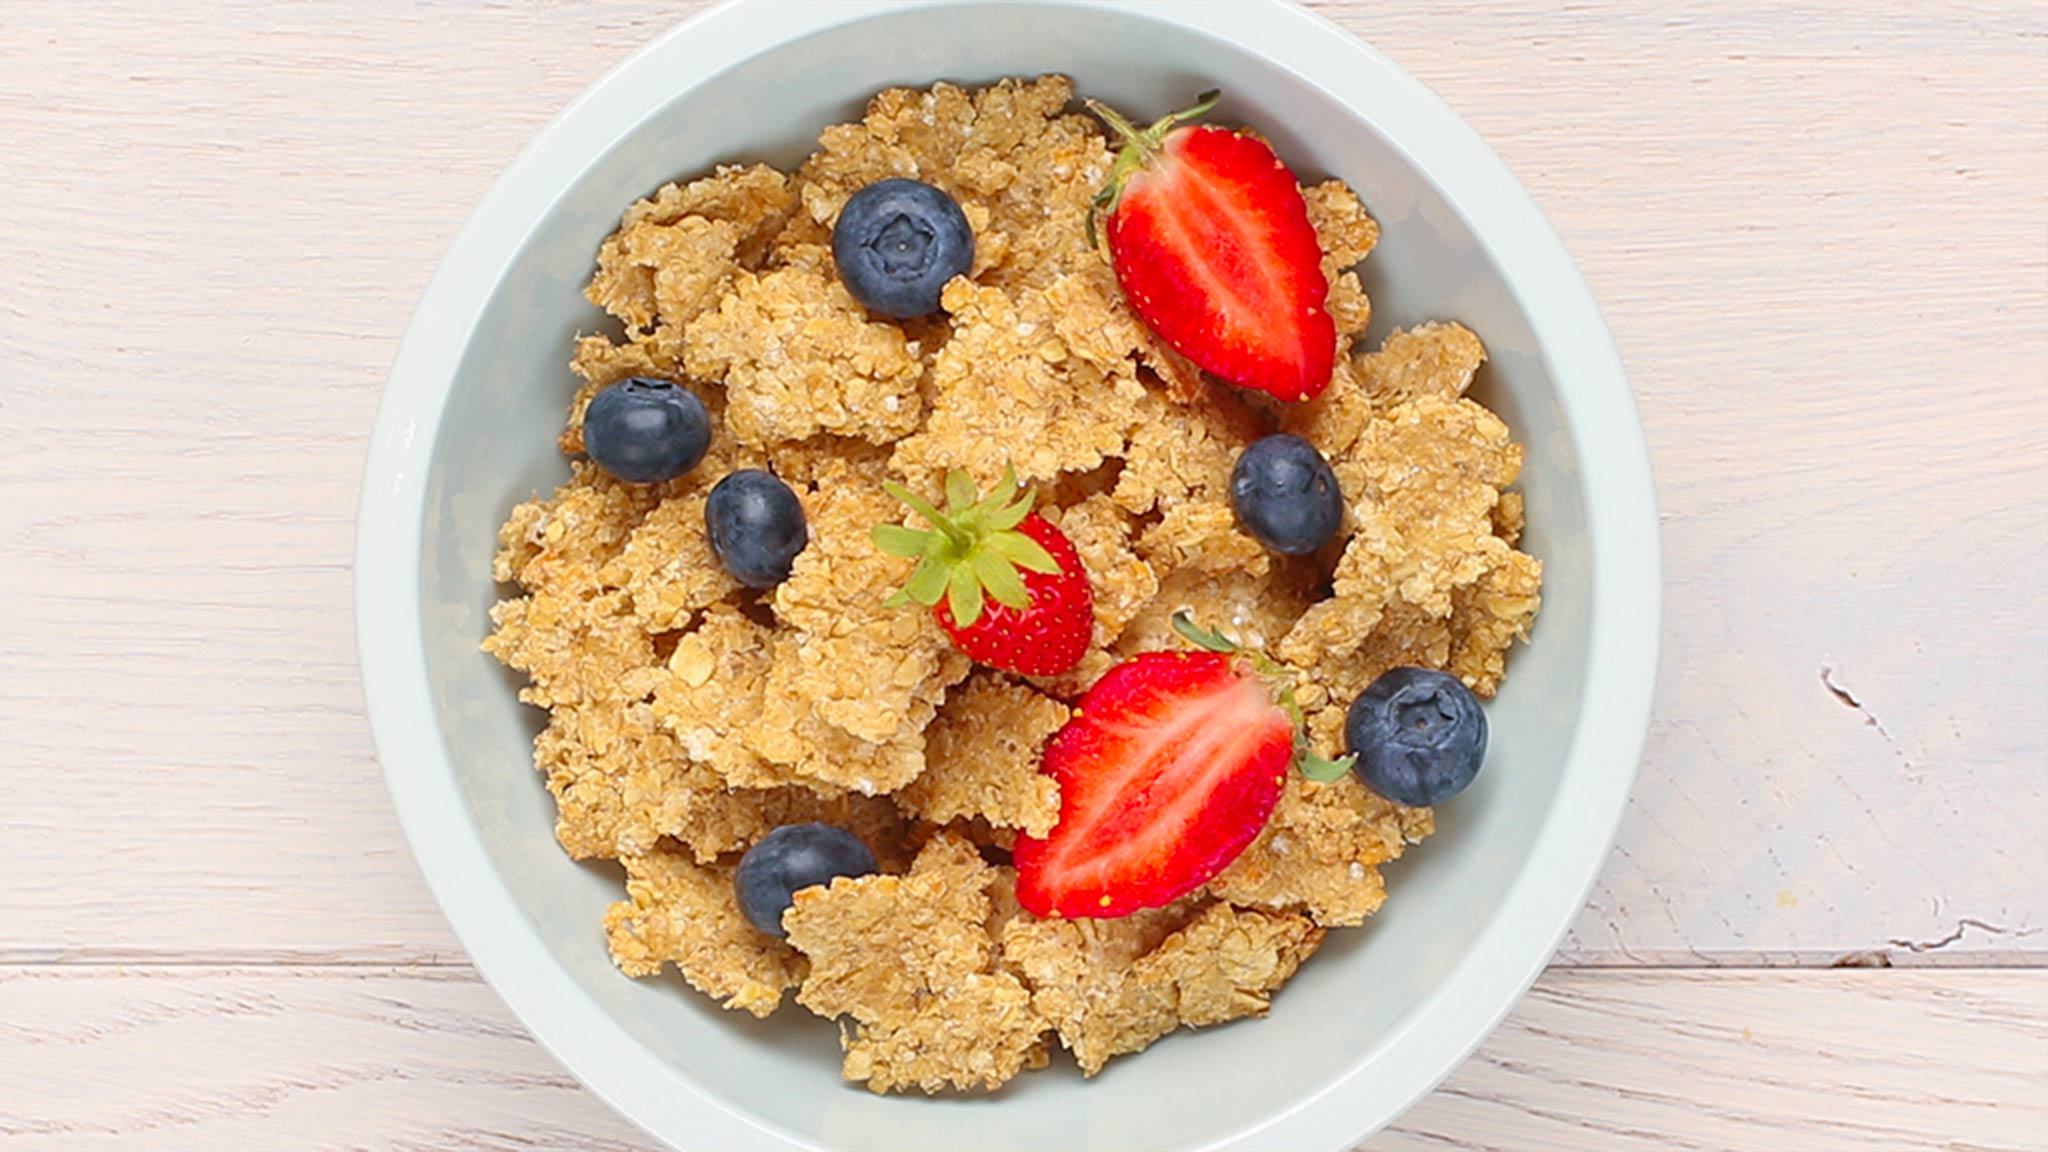 Bake Your Own Fitness Breakfast Cereal - Corn Flakes , HD Wallpaper & Backgrounds